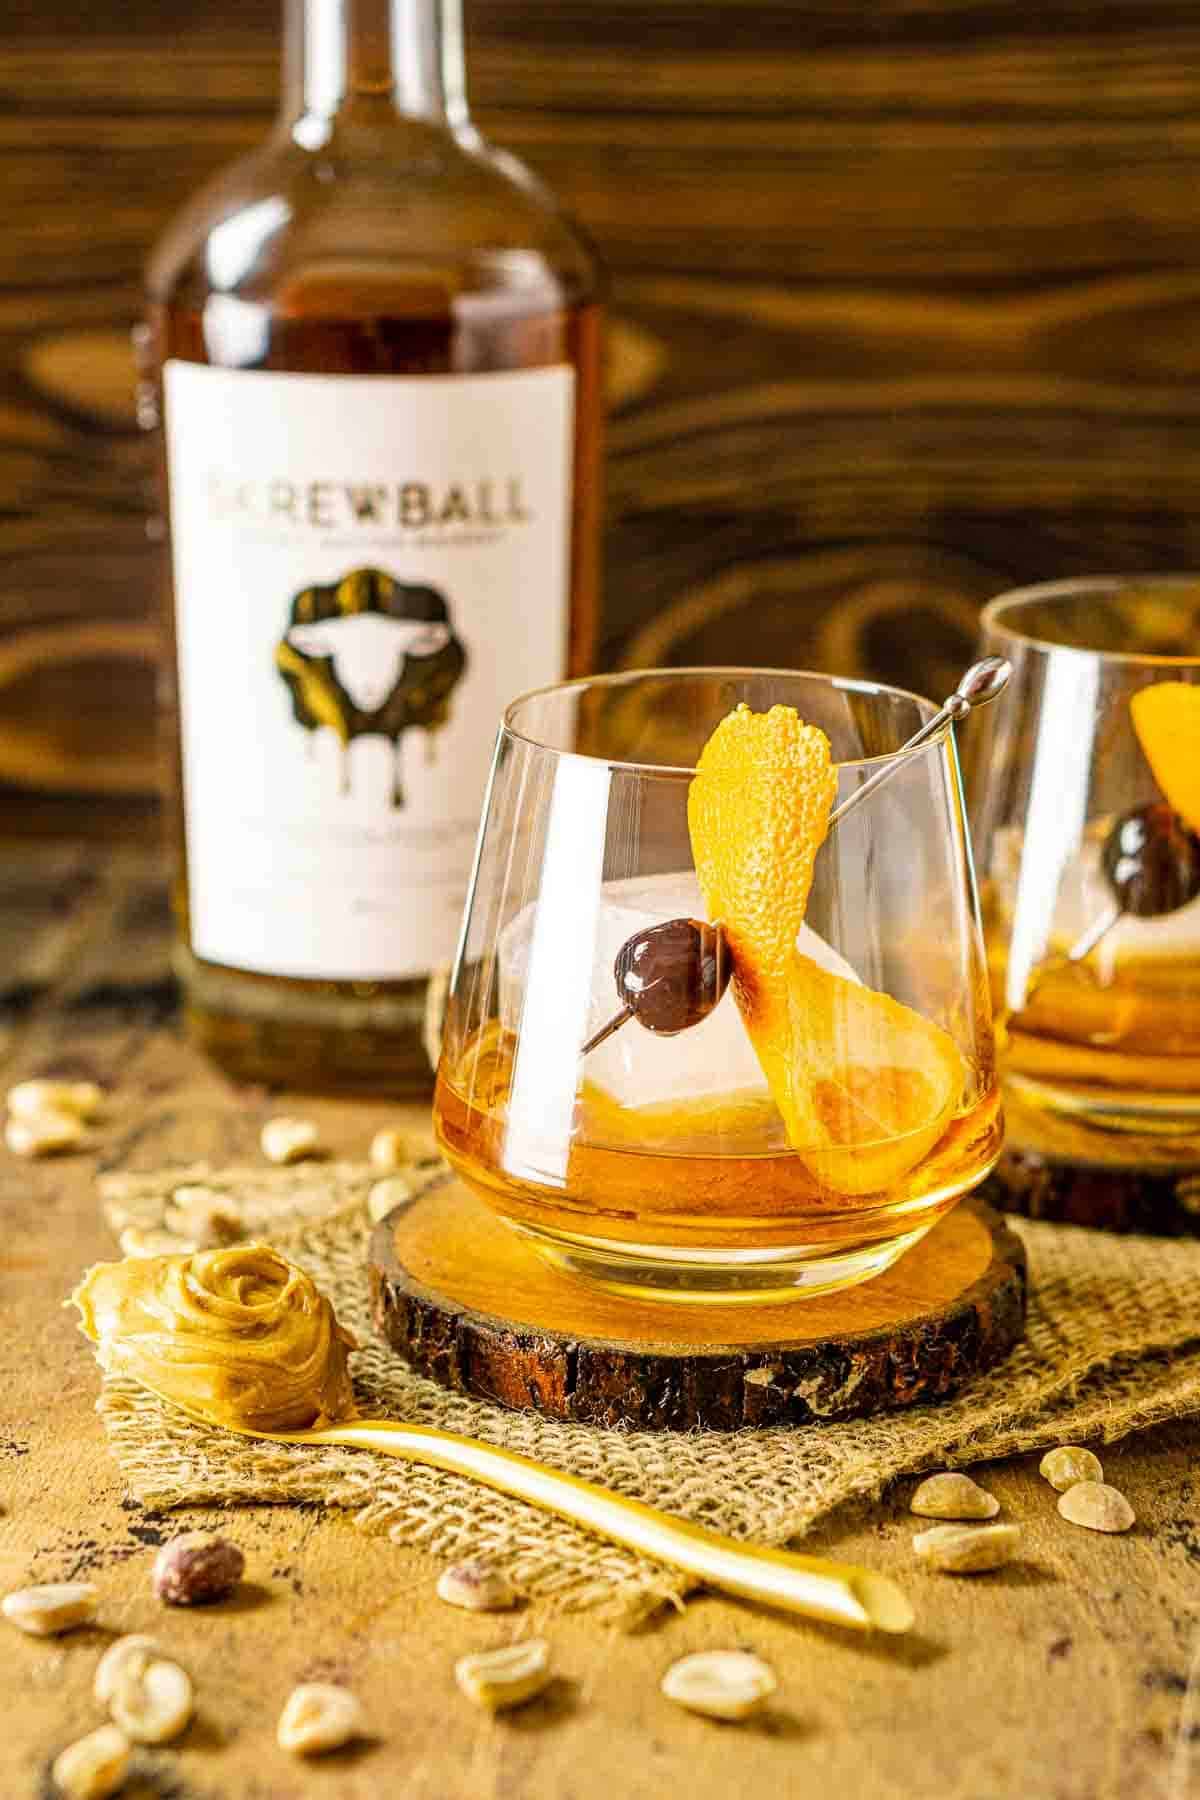 peanut butter whiskey drinks - skrewball old fashioned